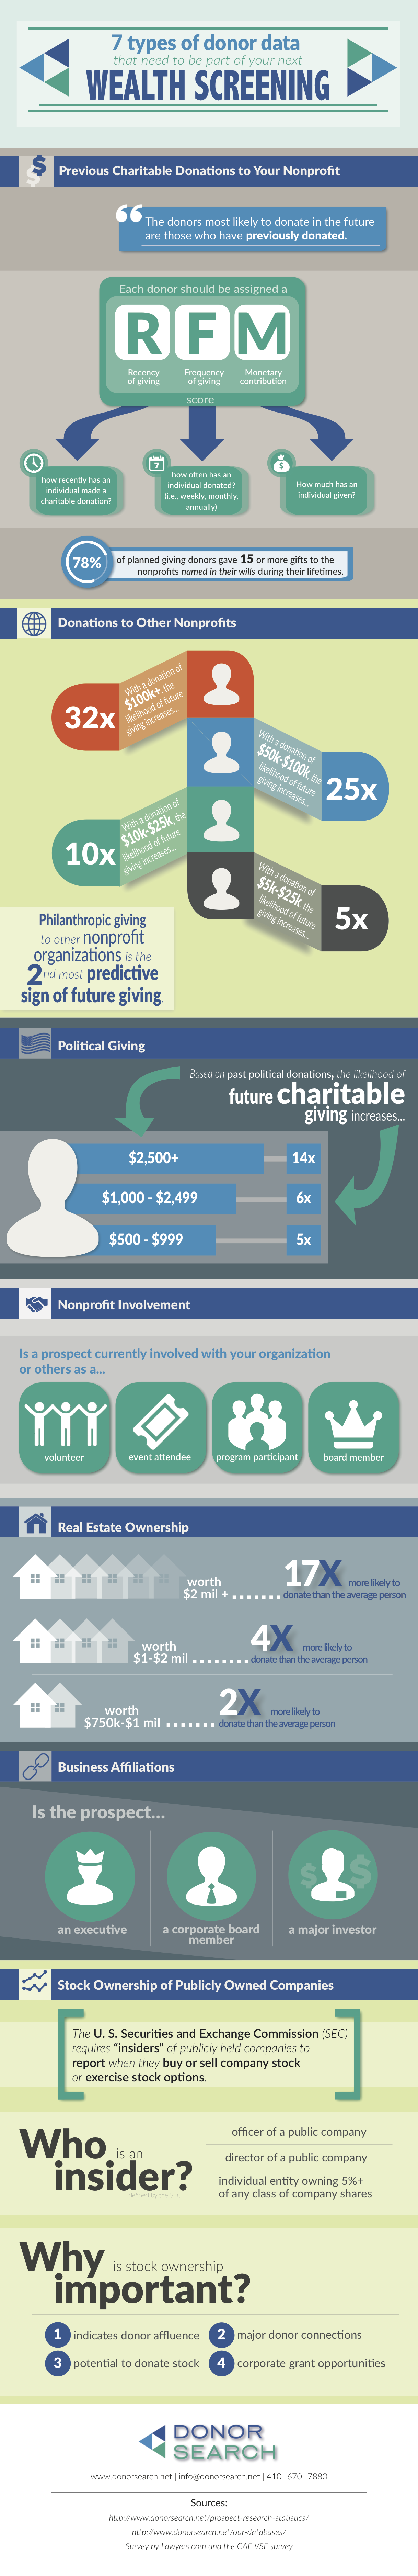 DonorSearchInfographic